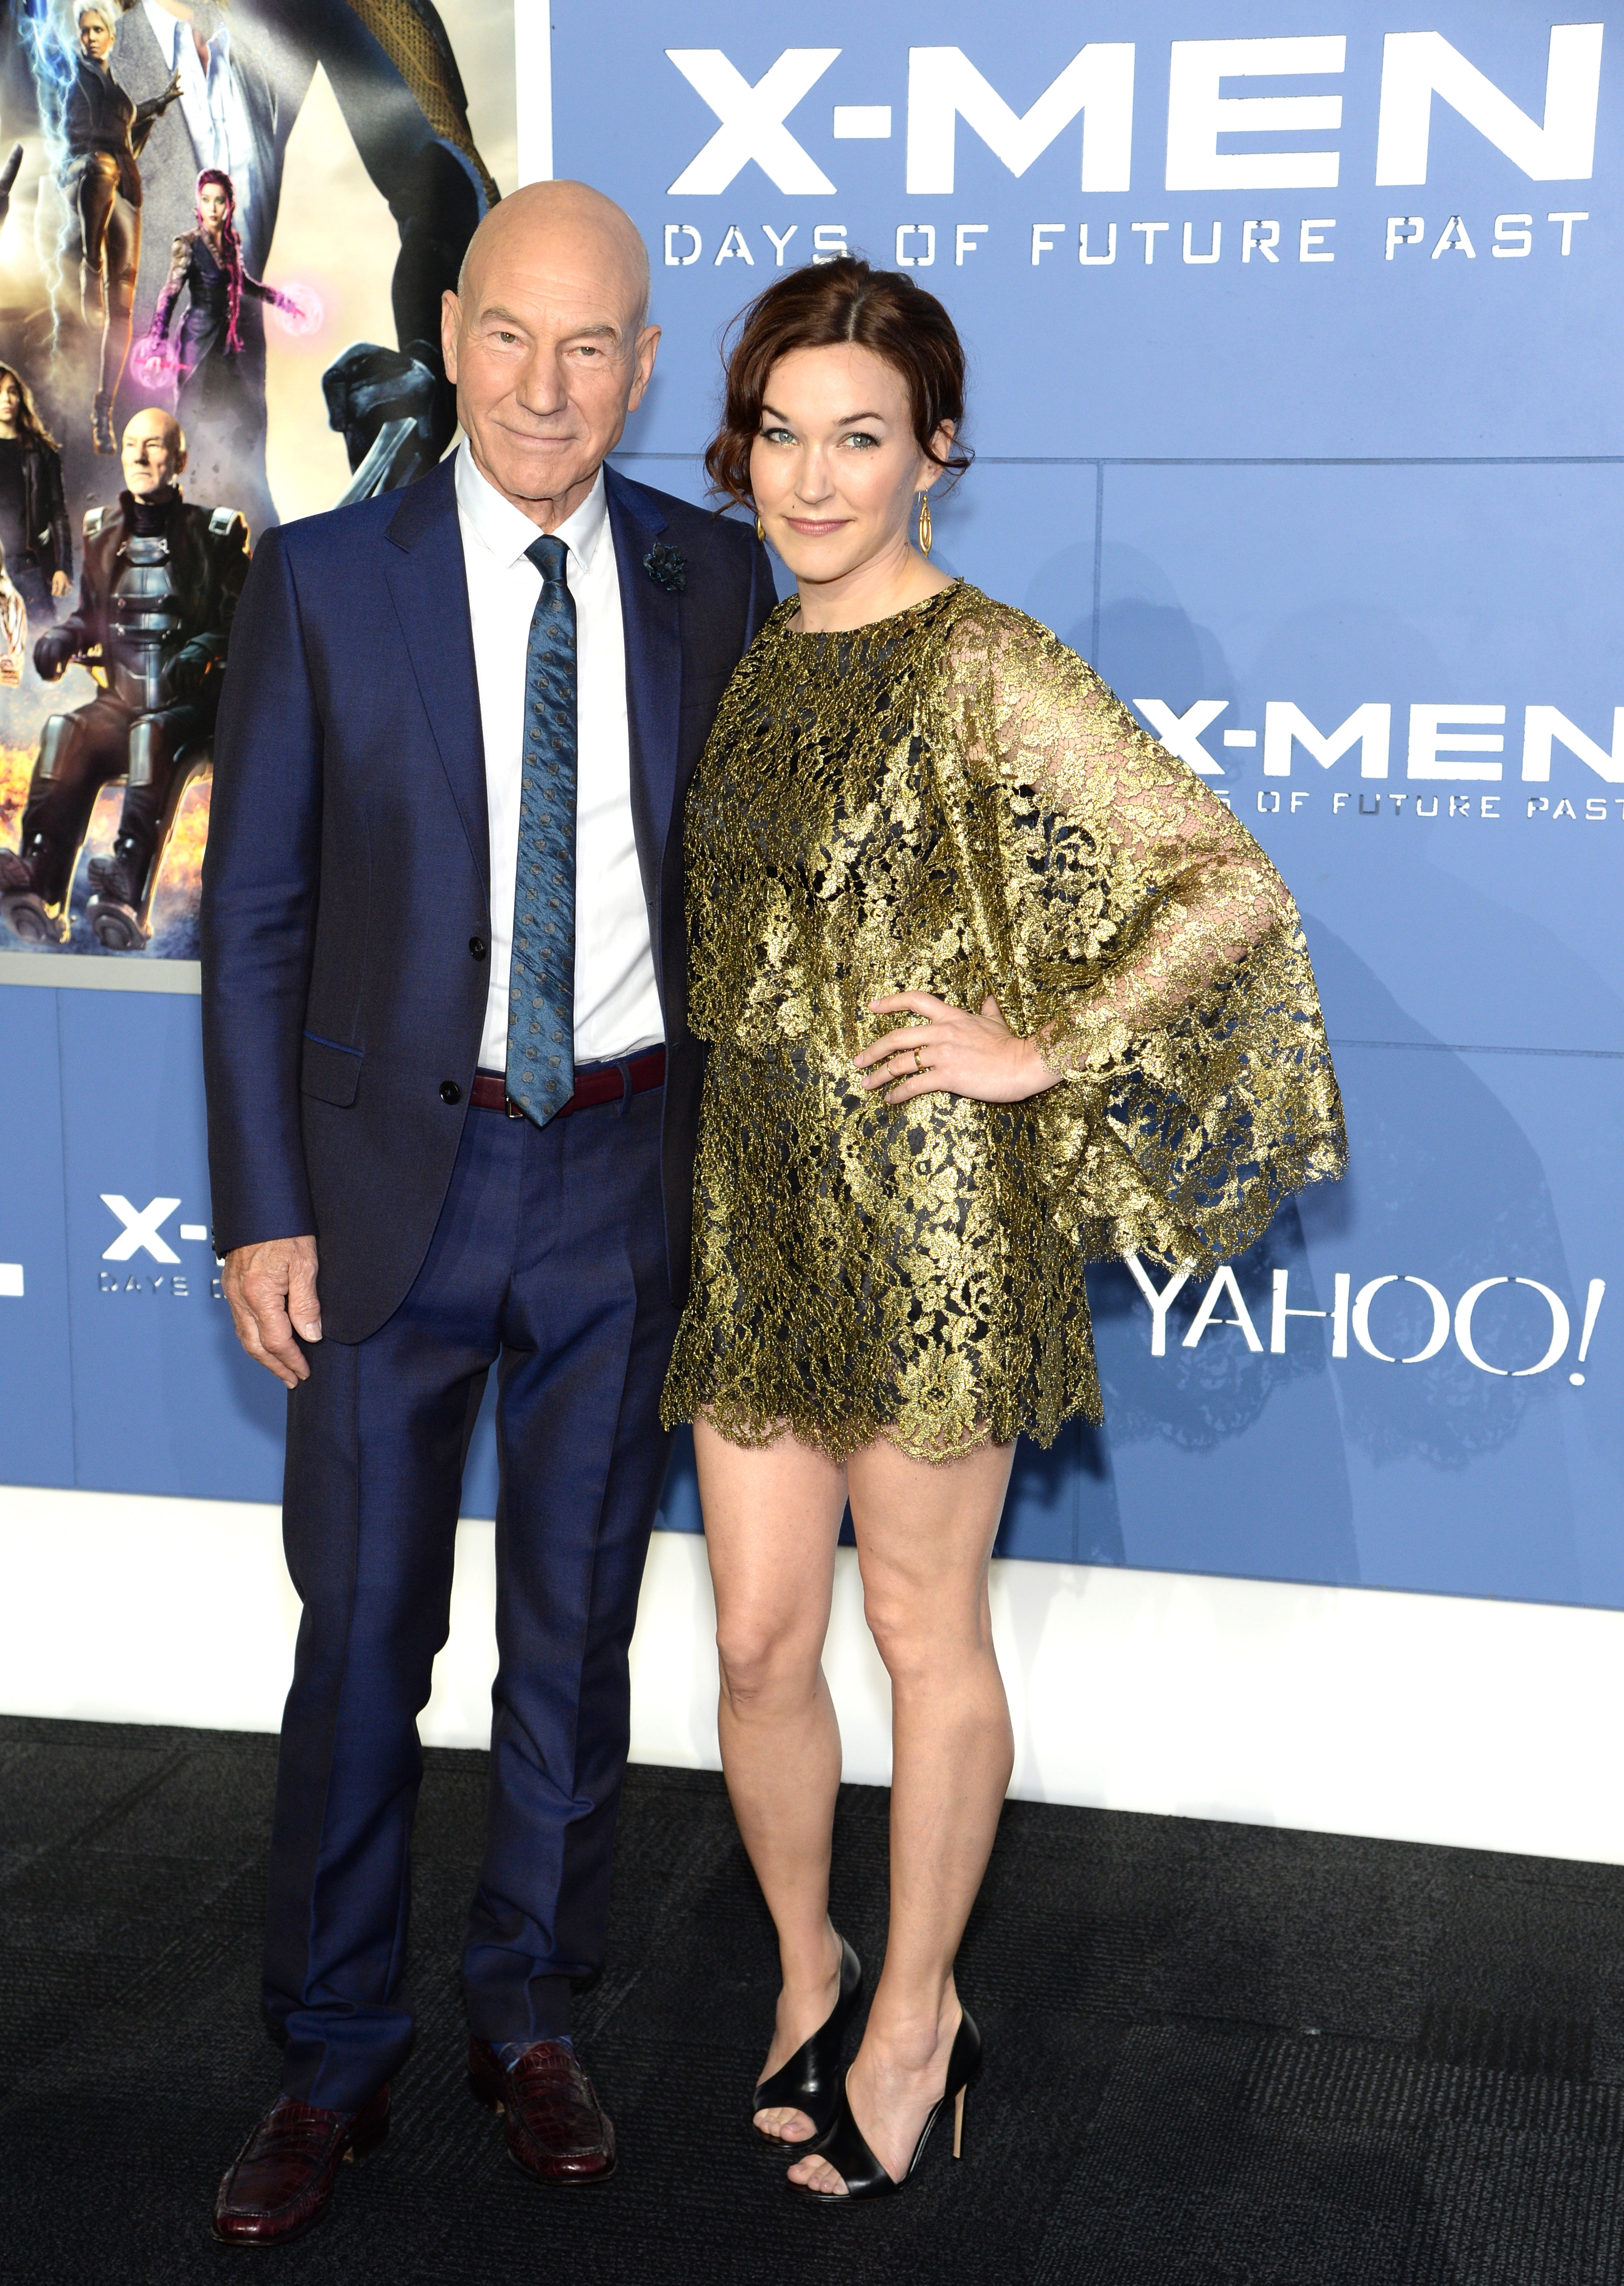 Patrick Stewart and Sunny Ozell at the "X-Men: Days of Future Past" world premiere in New York City on May 10, 2014 | Source: Getty Images